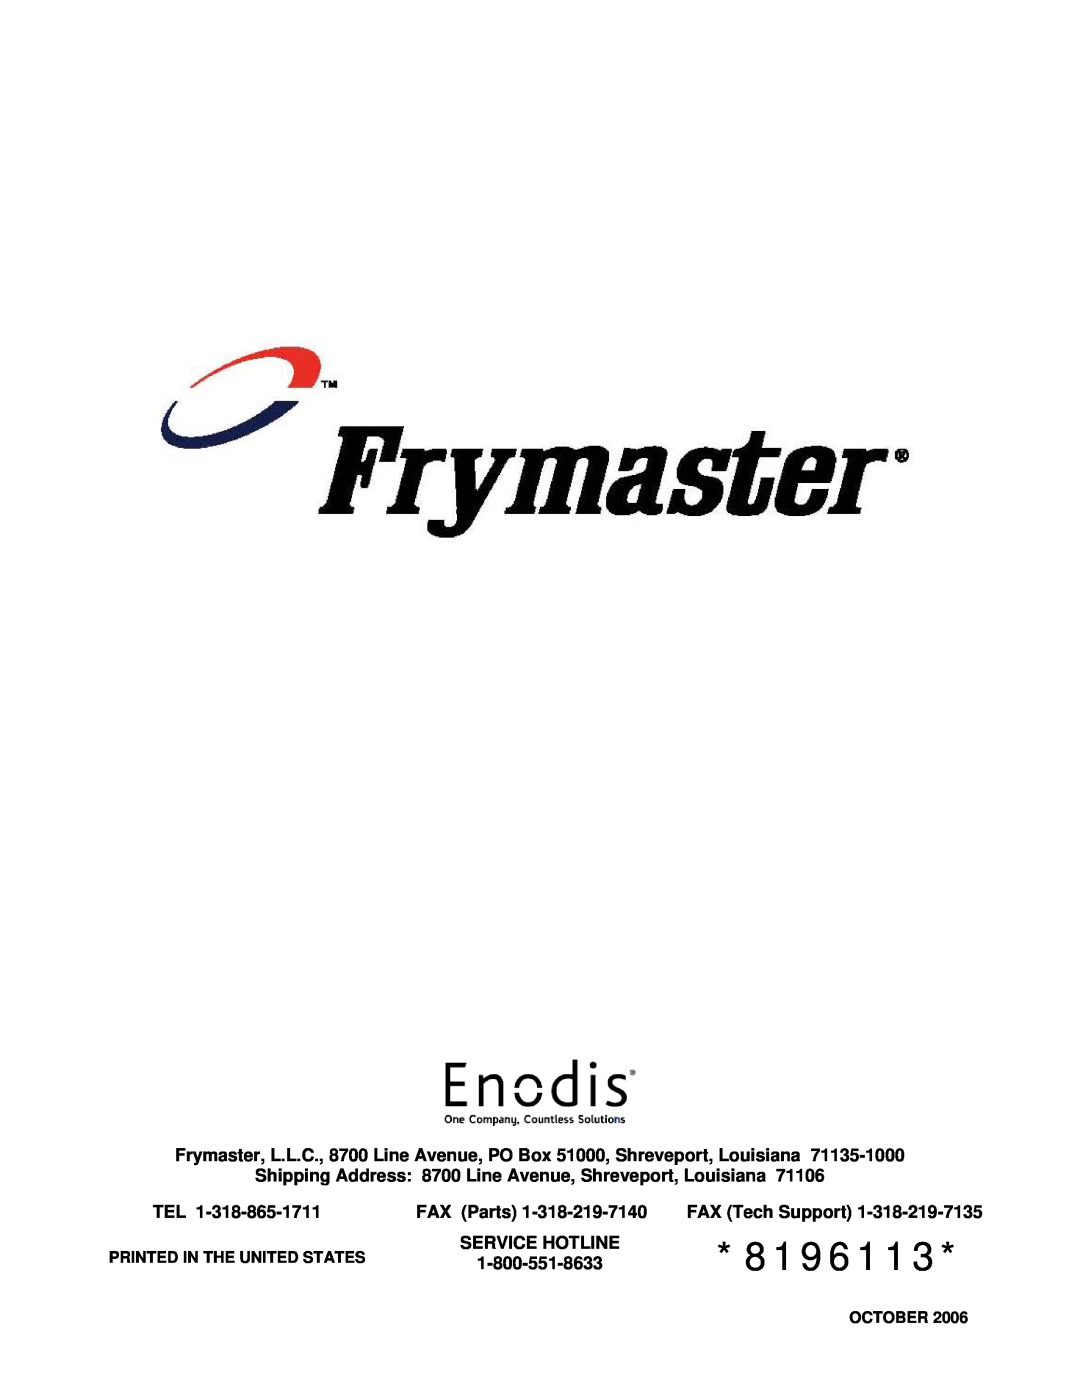 Frymaster 2836 Series operation manual 8196113, FAX Parts, FAX Tech Support, Service Hotline, October 